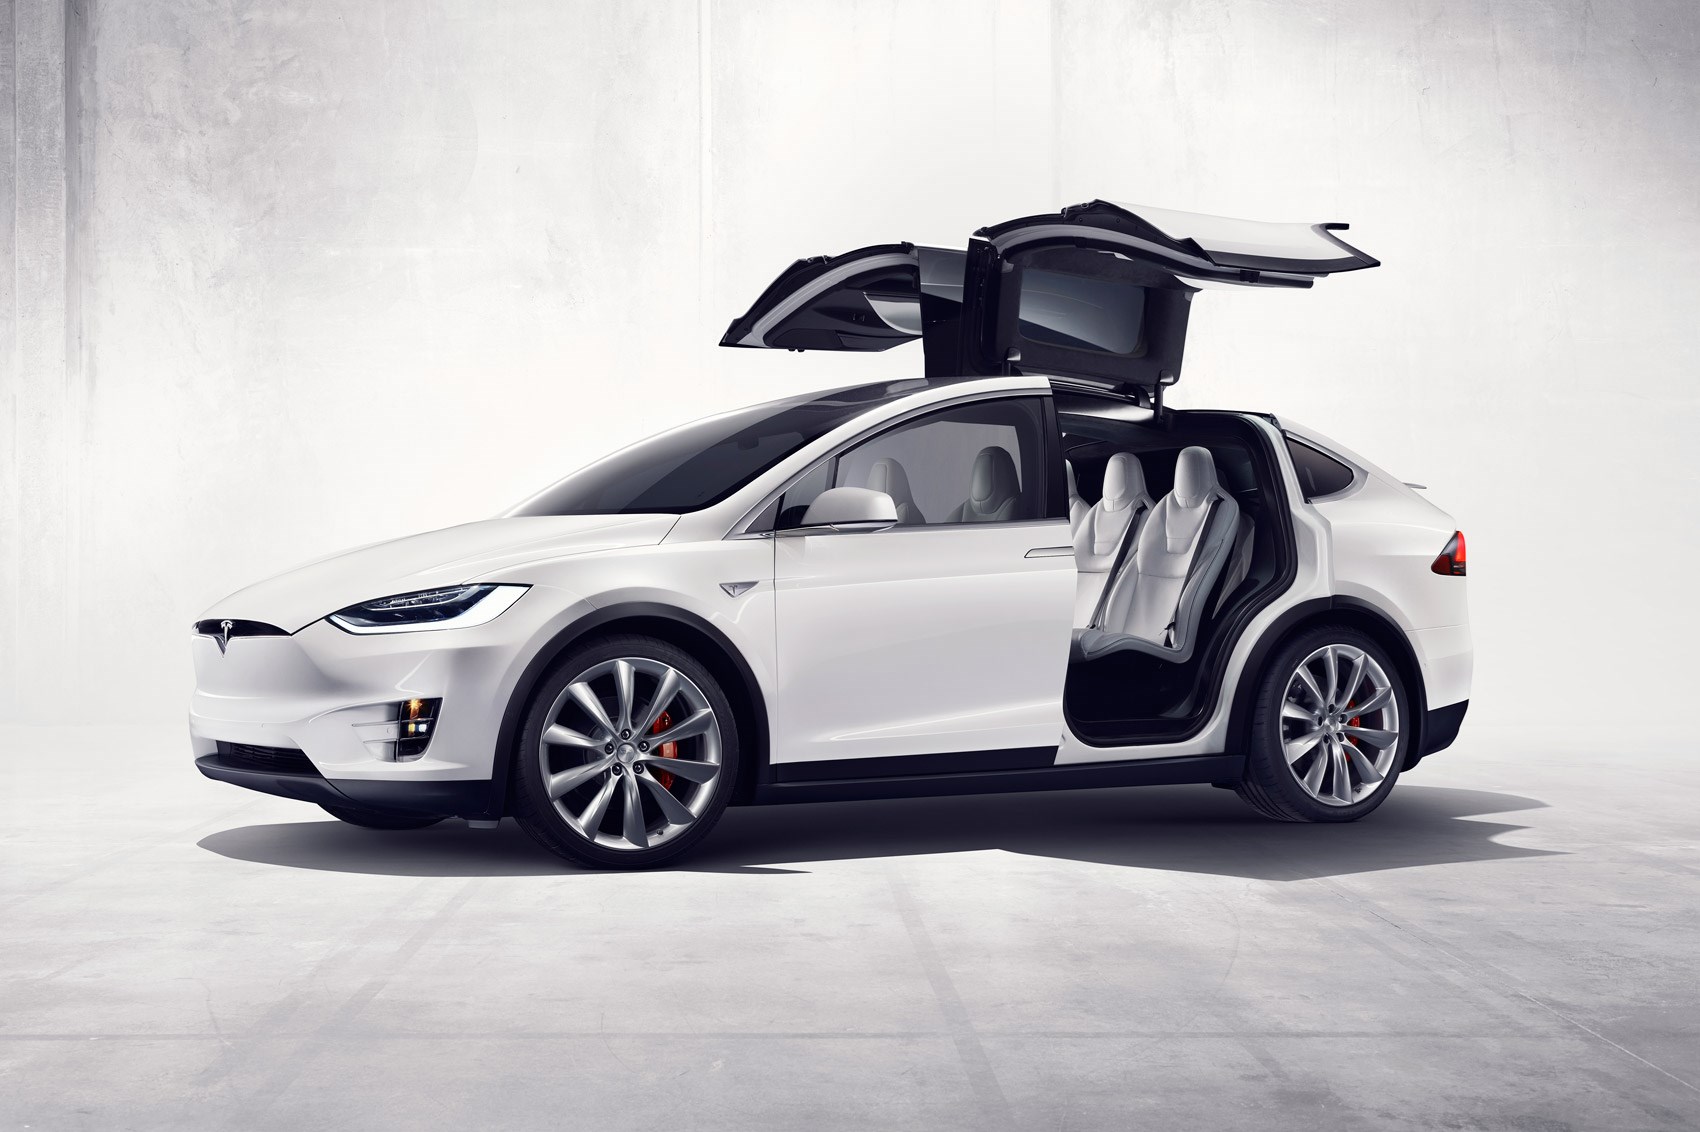 Doors Up Lets Do This Tesla Model X On Sale For 74480